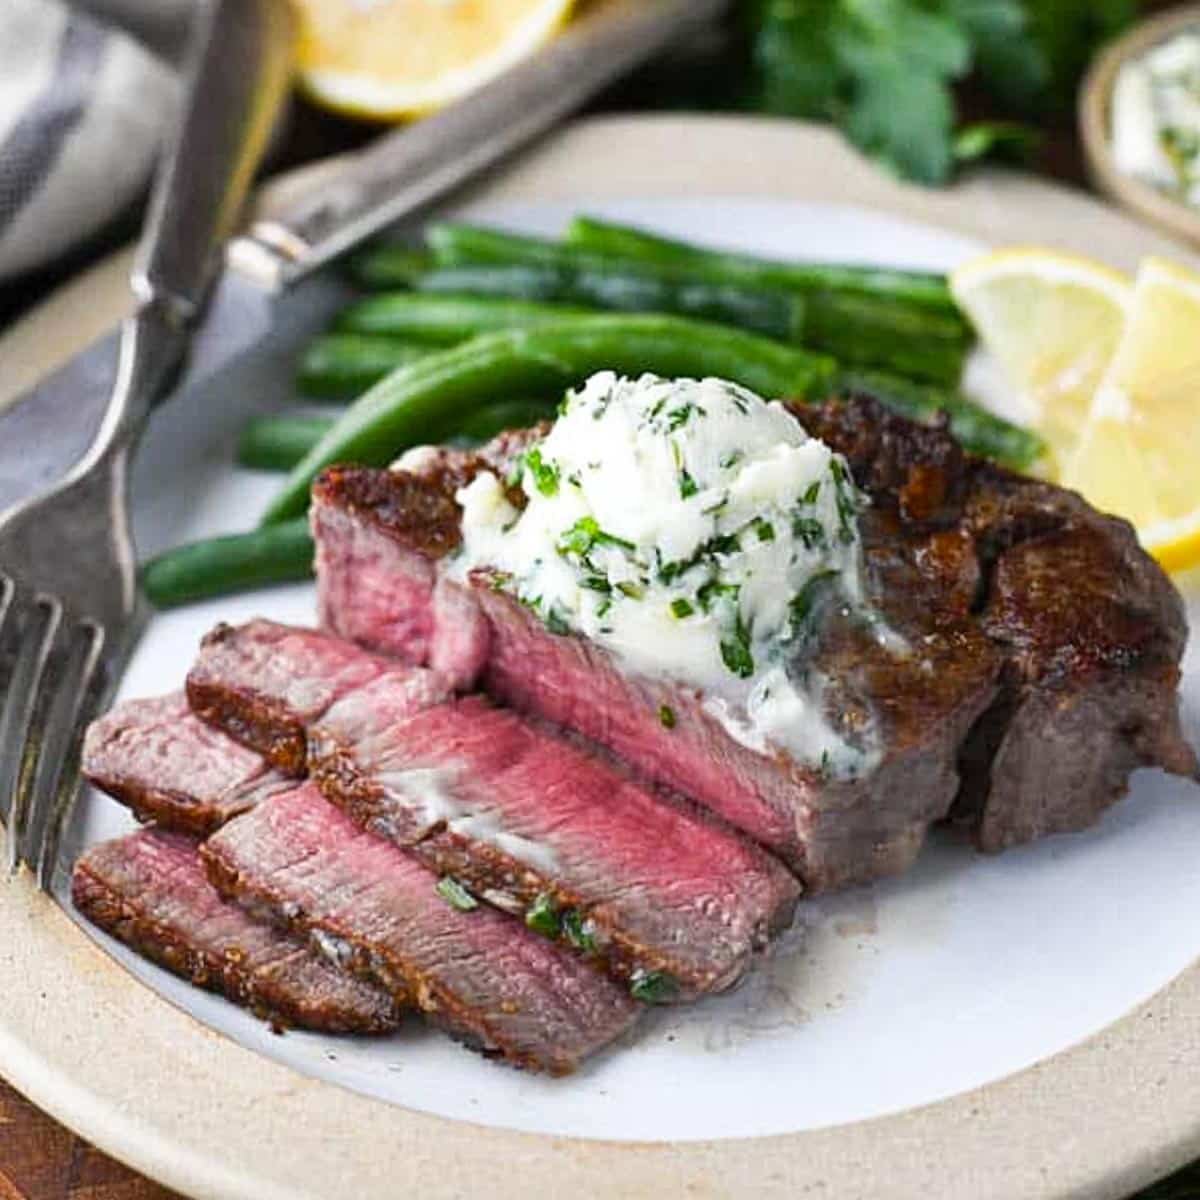 https://www.theseasonedmom.com/wp-content/uploads/2023/03/How-to-Cook-Filet-Mignon-in-a-Cast-Iron-Skillet-Square.jpg